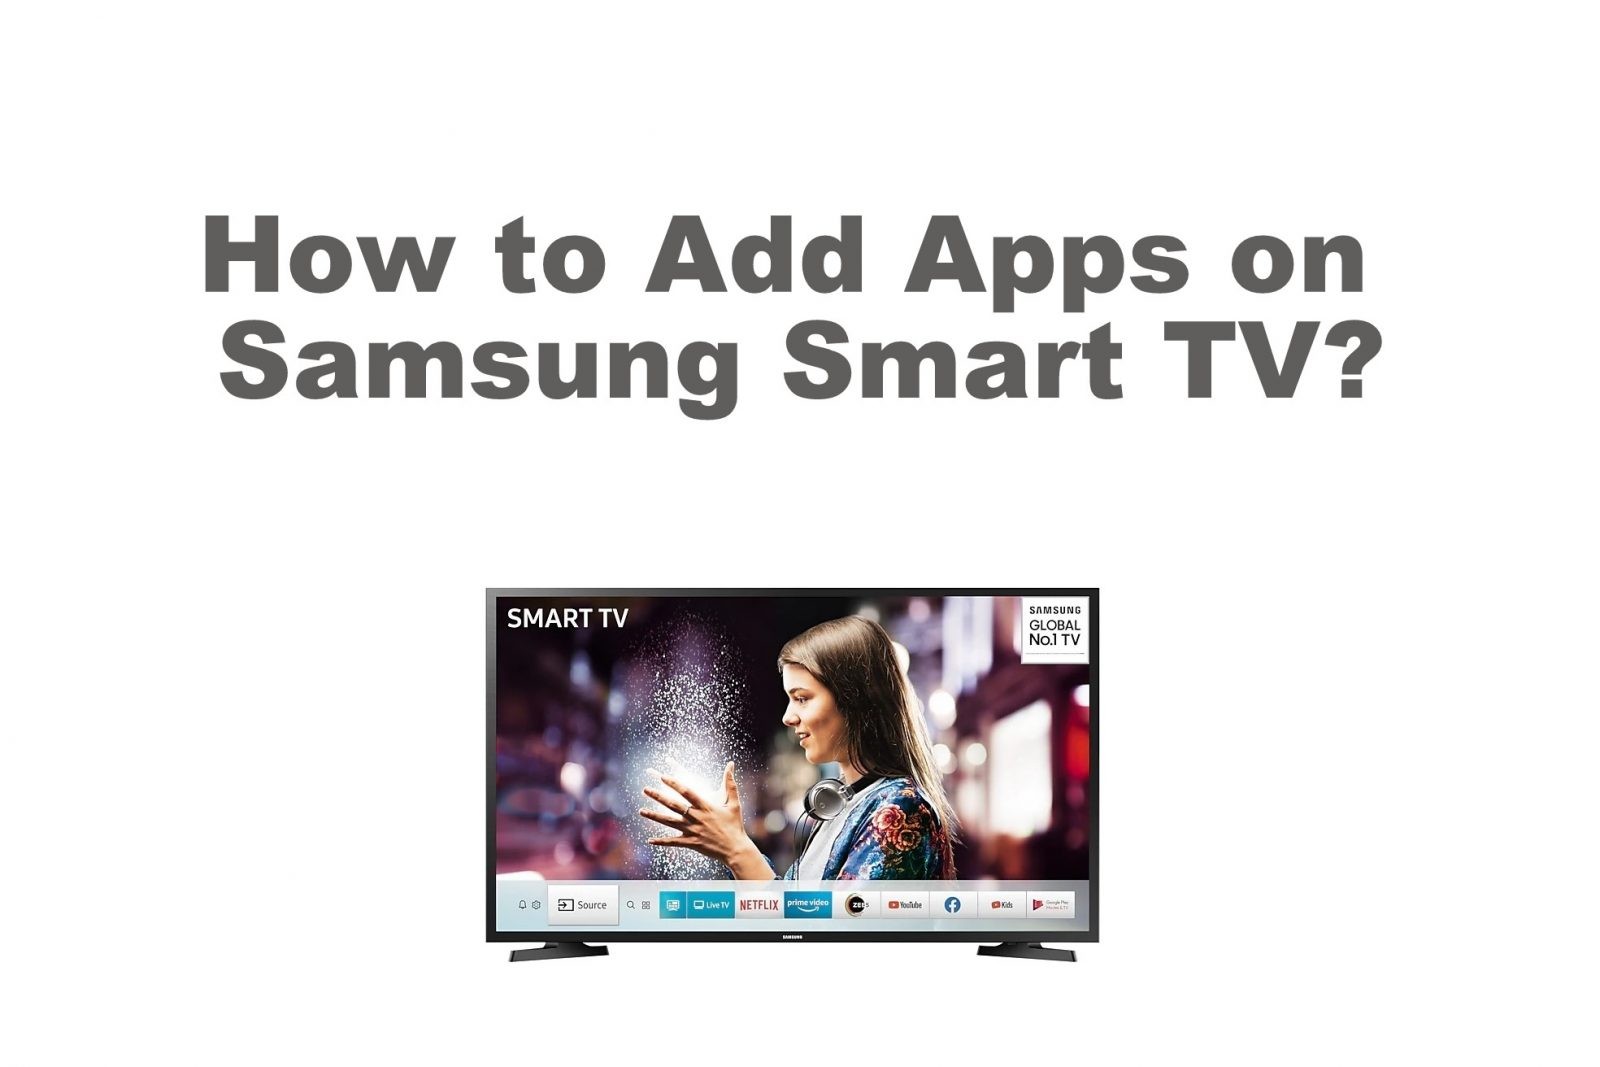 How to Add Apps on Samsung Smart TV